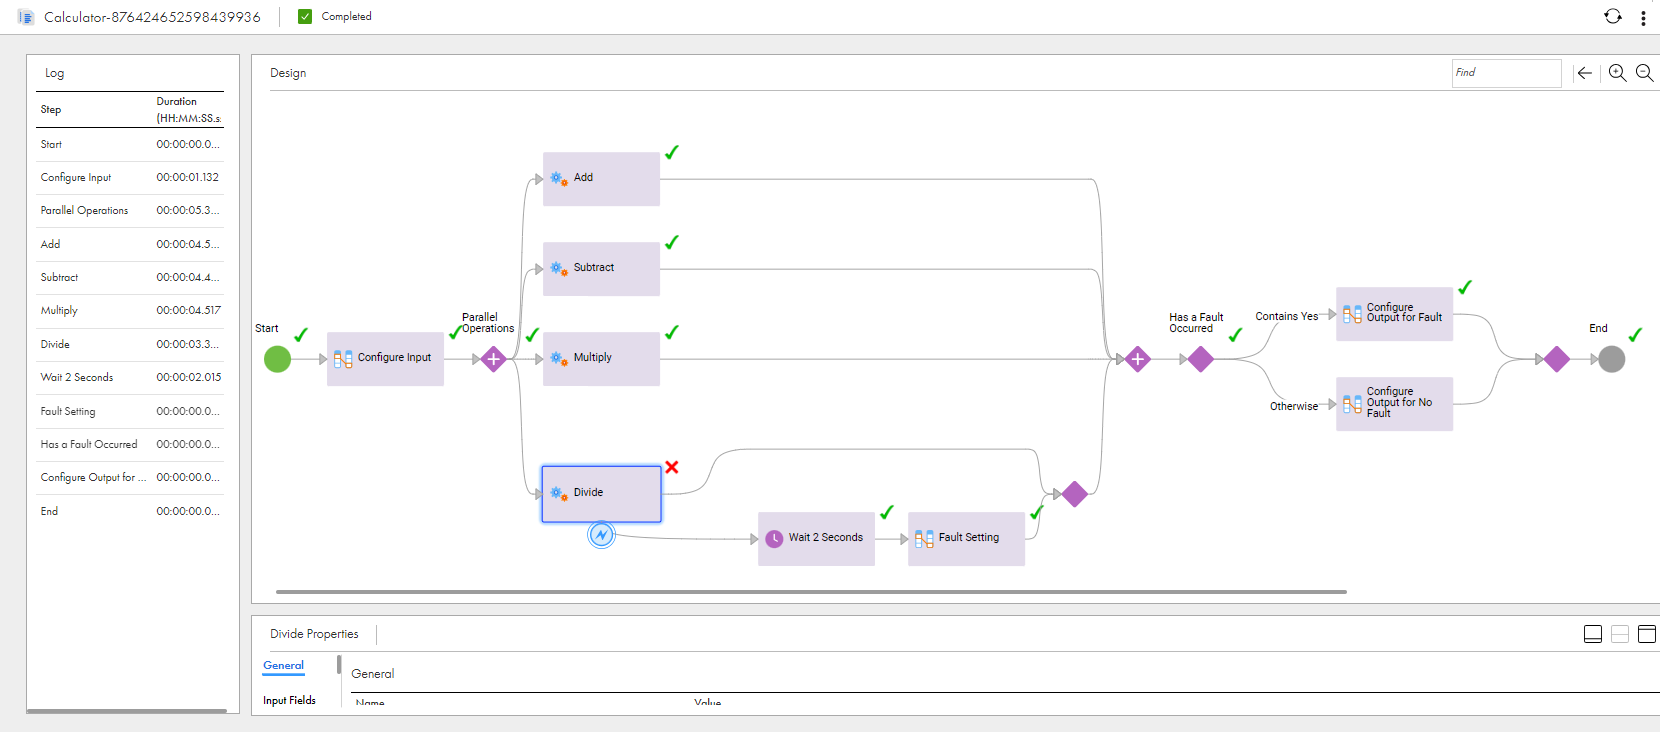 This image shows the Process View Detail page of the process instance. The Divide Service step has faulted, but all other steps are succesful. 
				  